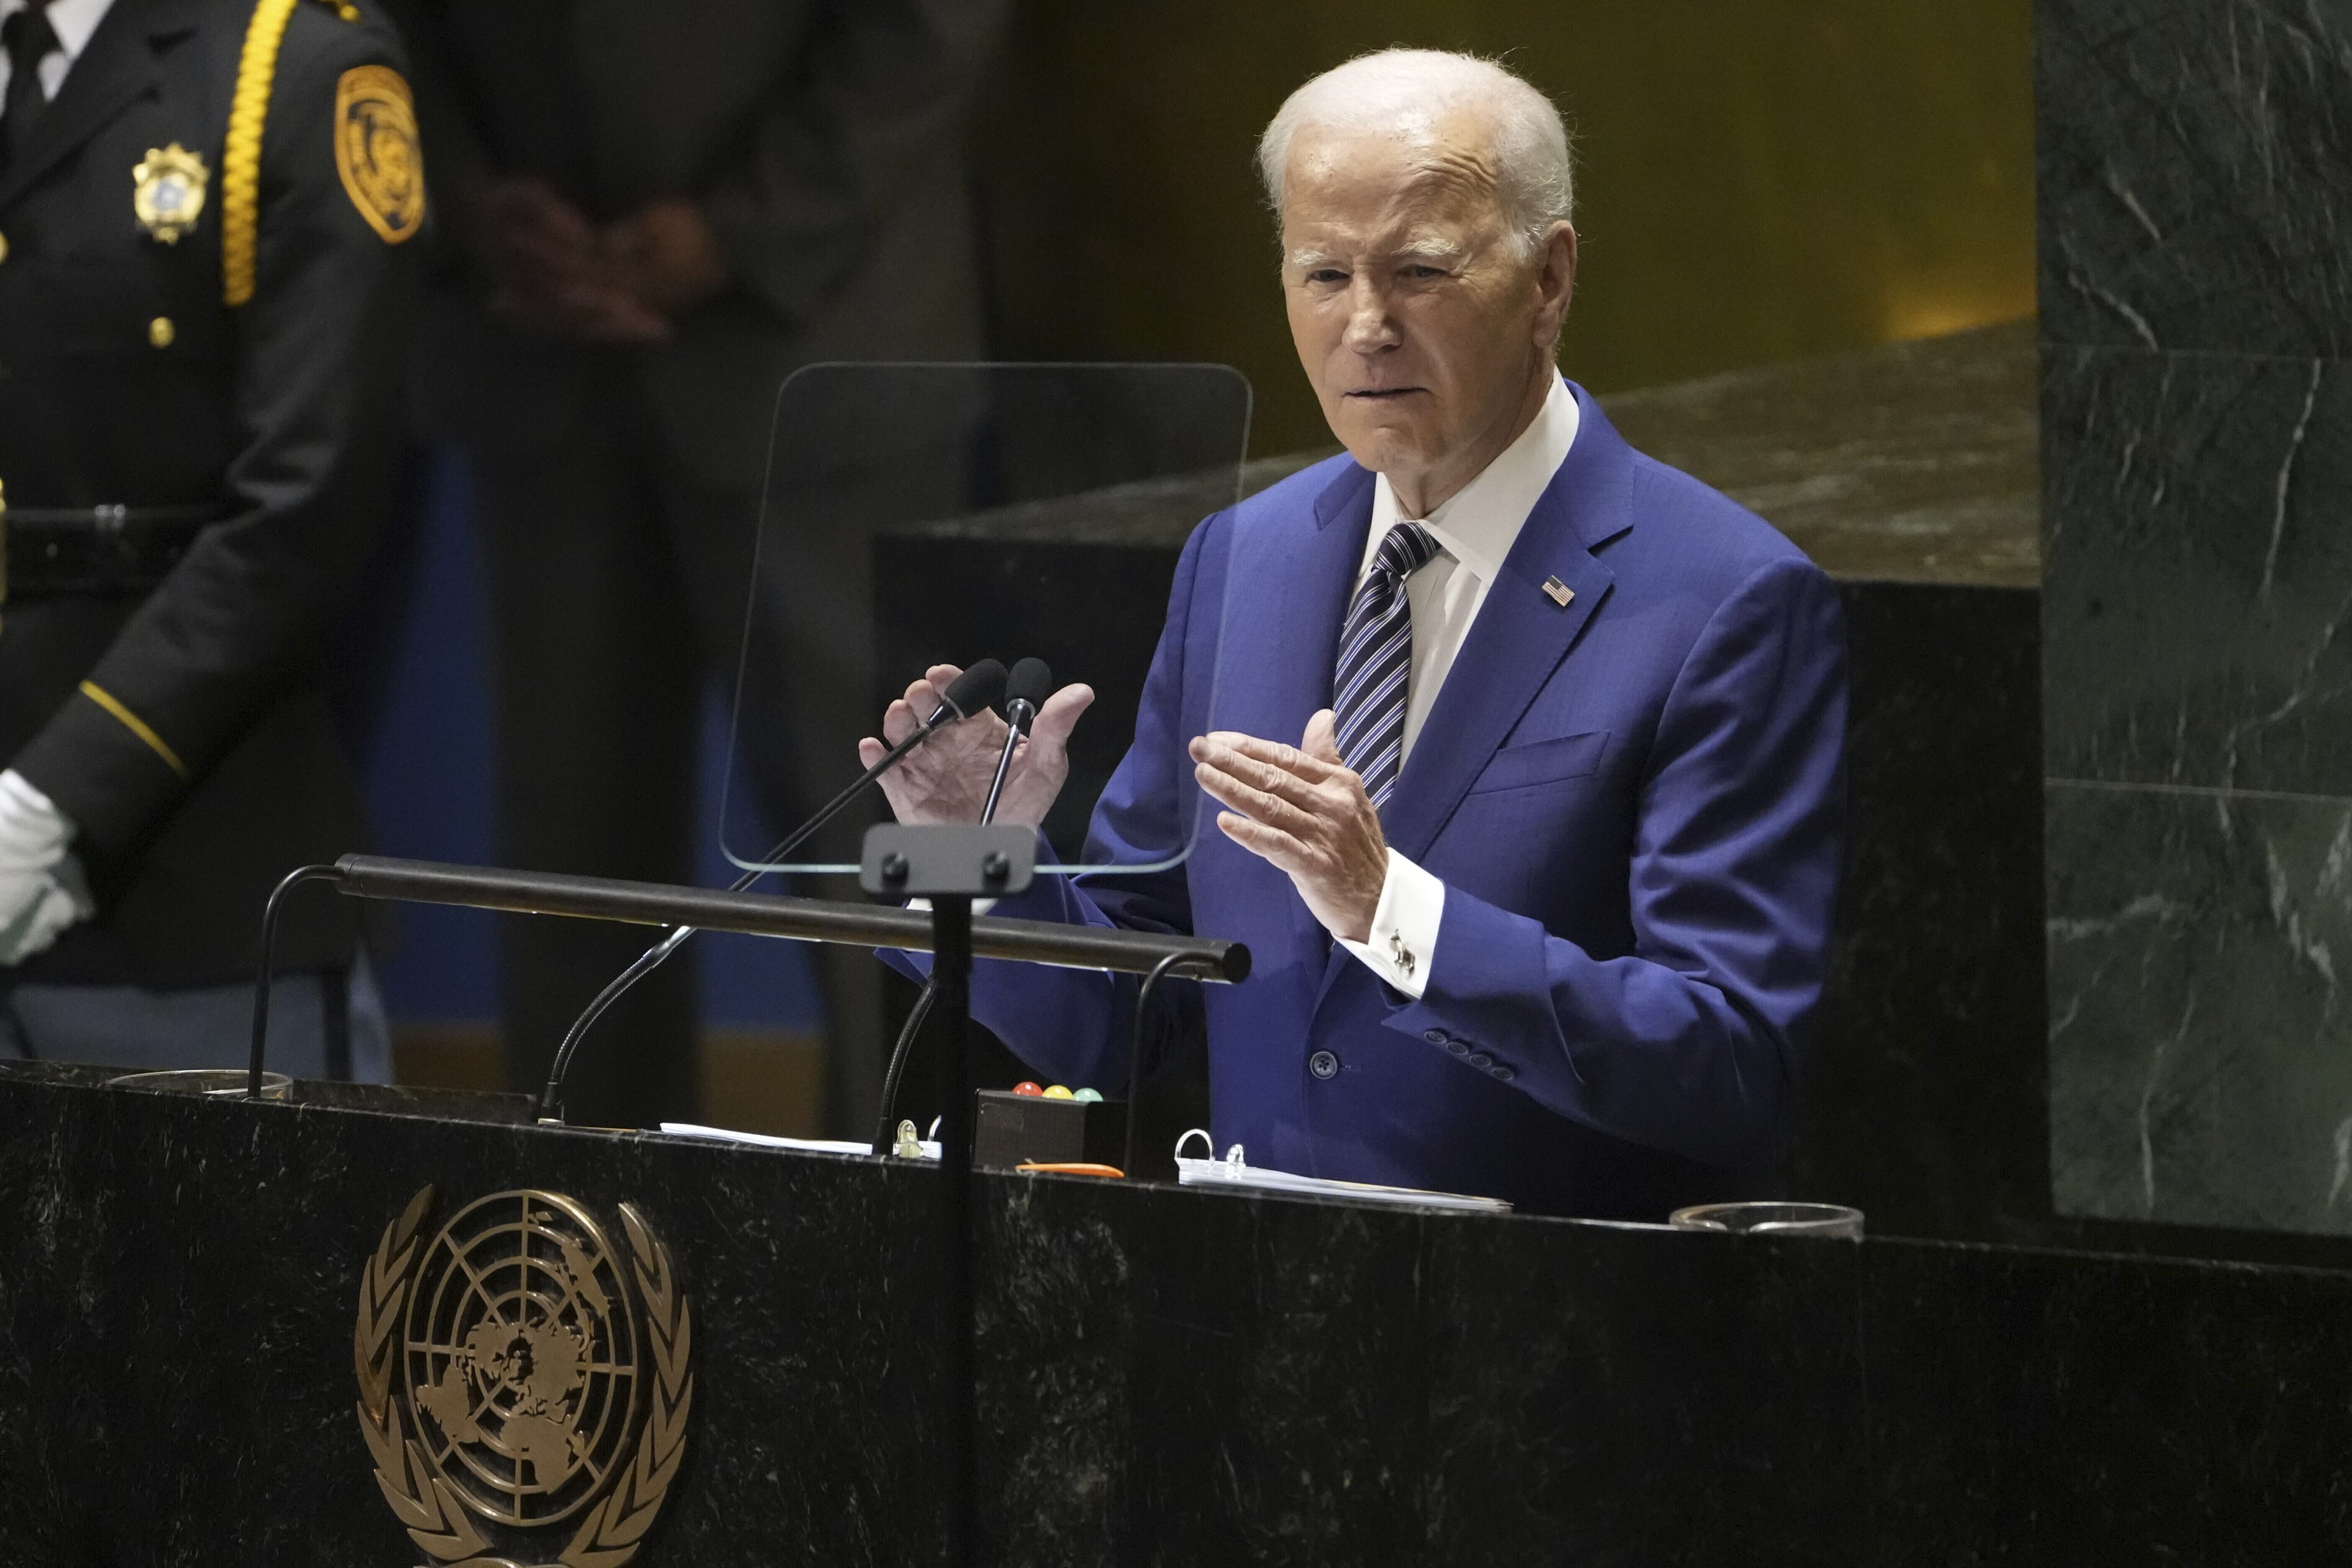 US President Joe Biden addresses the 78th United Nations General Assembly in New York on Tuesday. Photo: AP